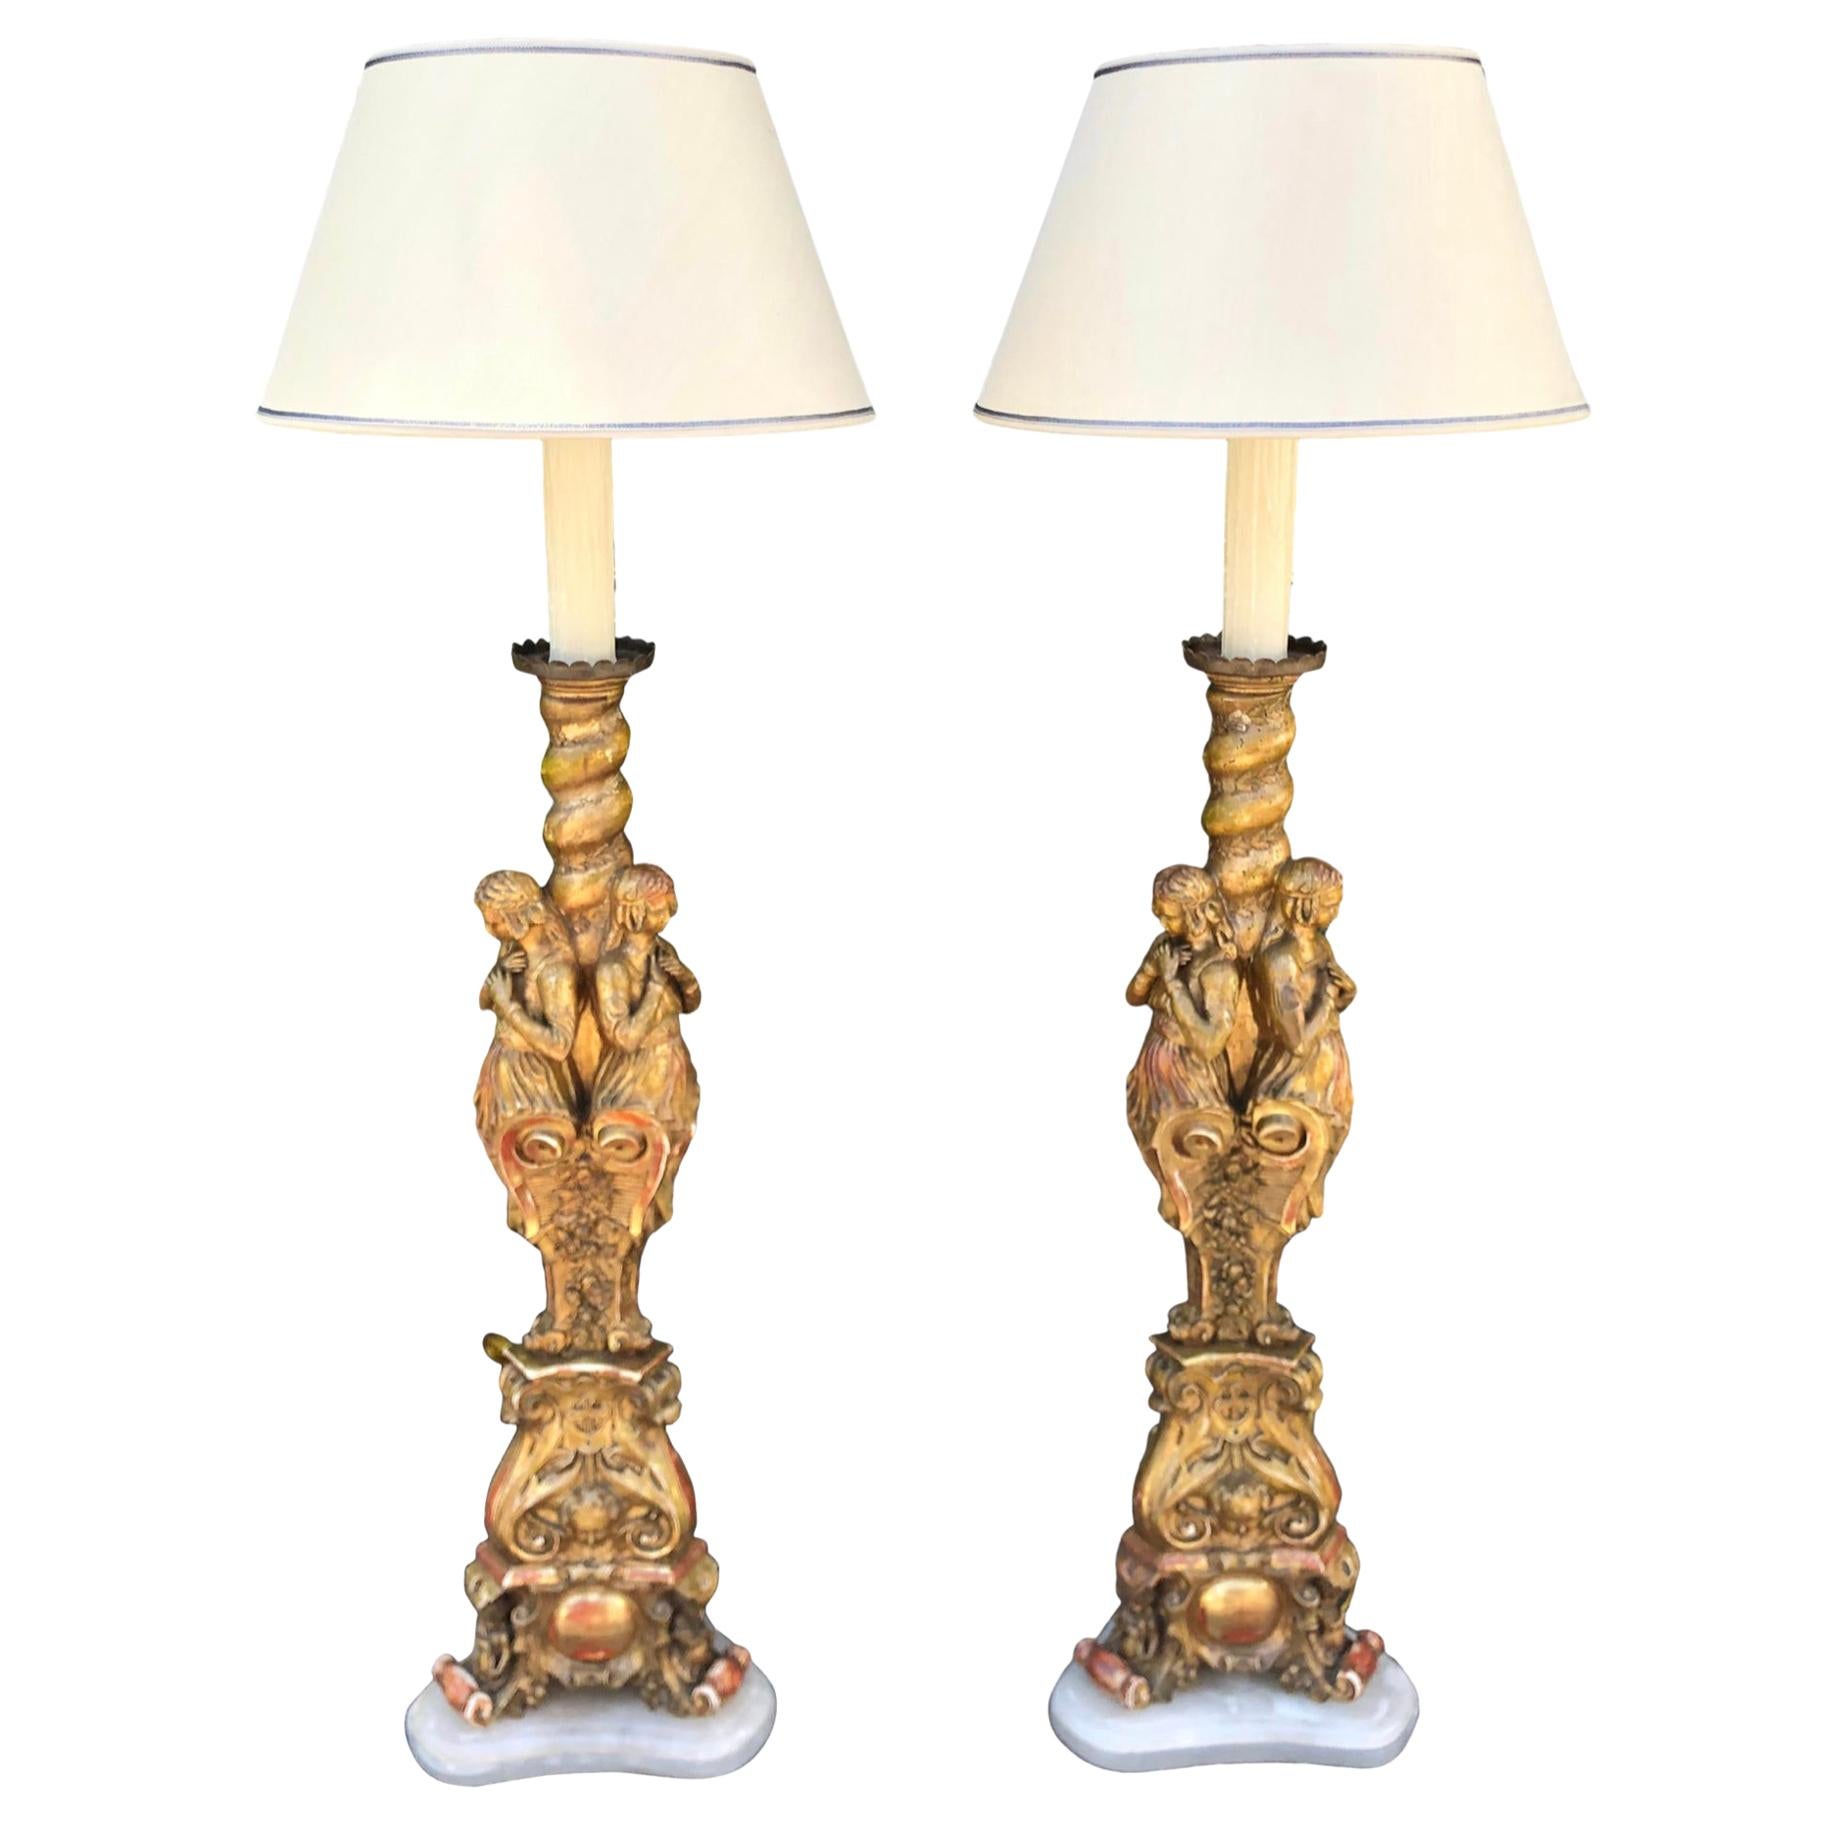 Antique French Giltwood Figural Cathedral Floor Lamps, a Pair For Sale